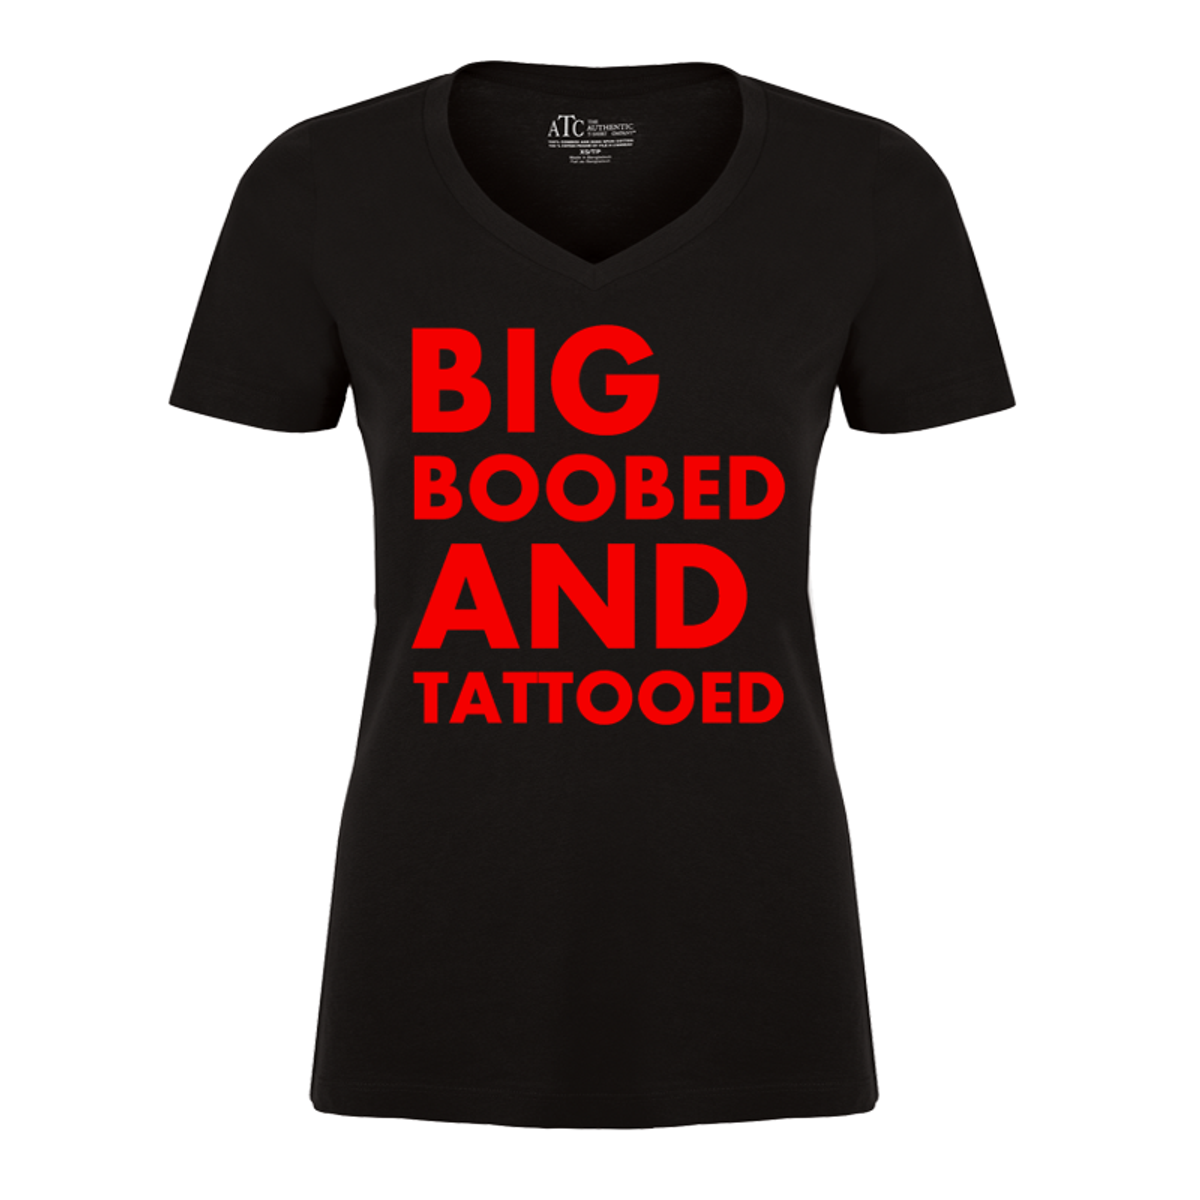 Women's Big Boobed And Tattooed - Tshirt - The Inked Boys Shop